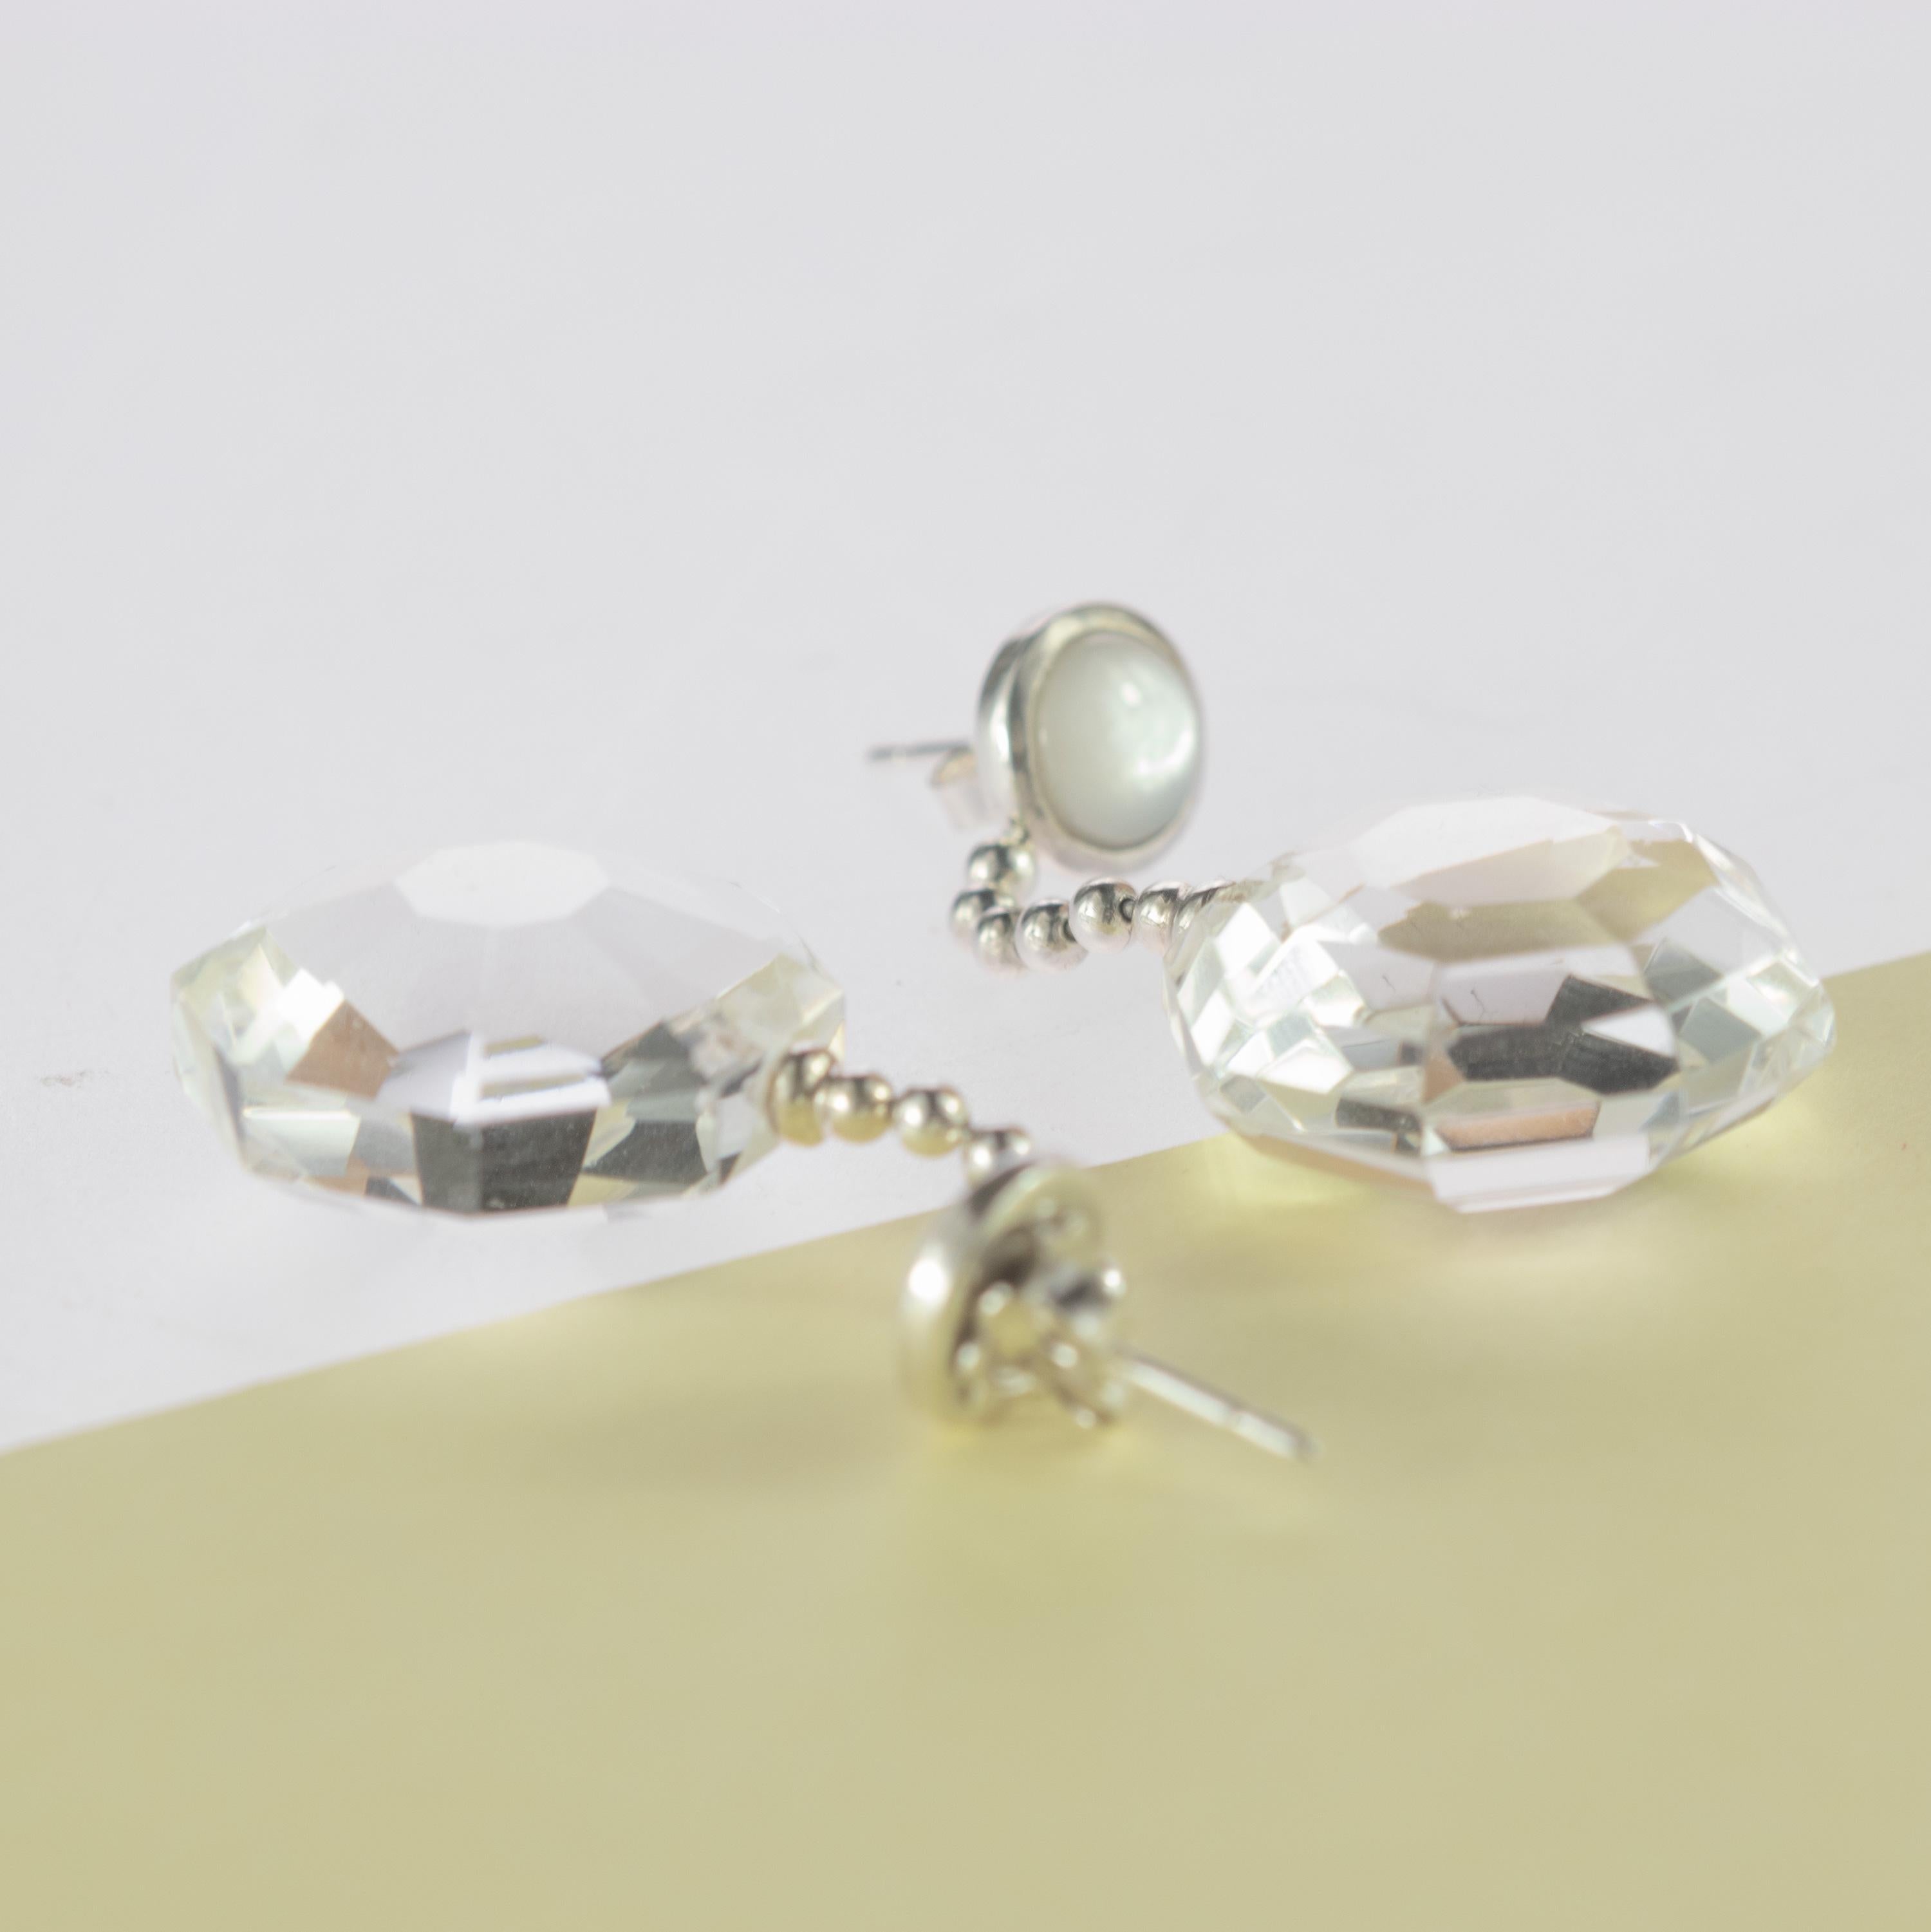 Octagon Cut Faceted Rock Crystal Octagon Pearl Drop Round 925 Sterling Silver Chain Earrings